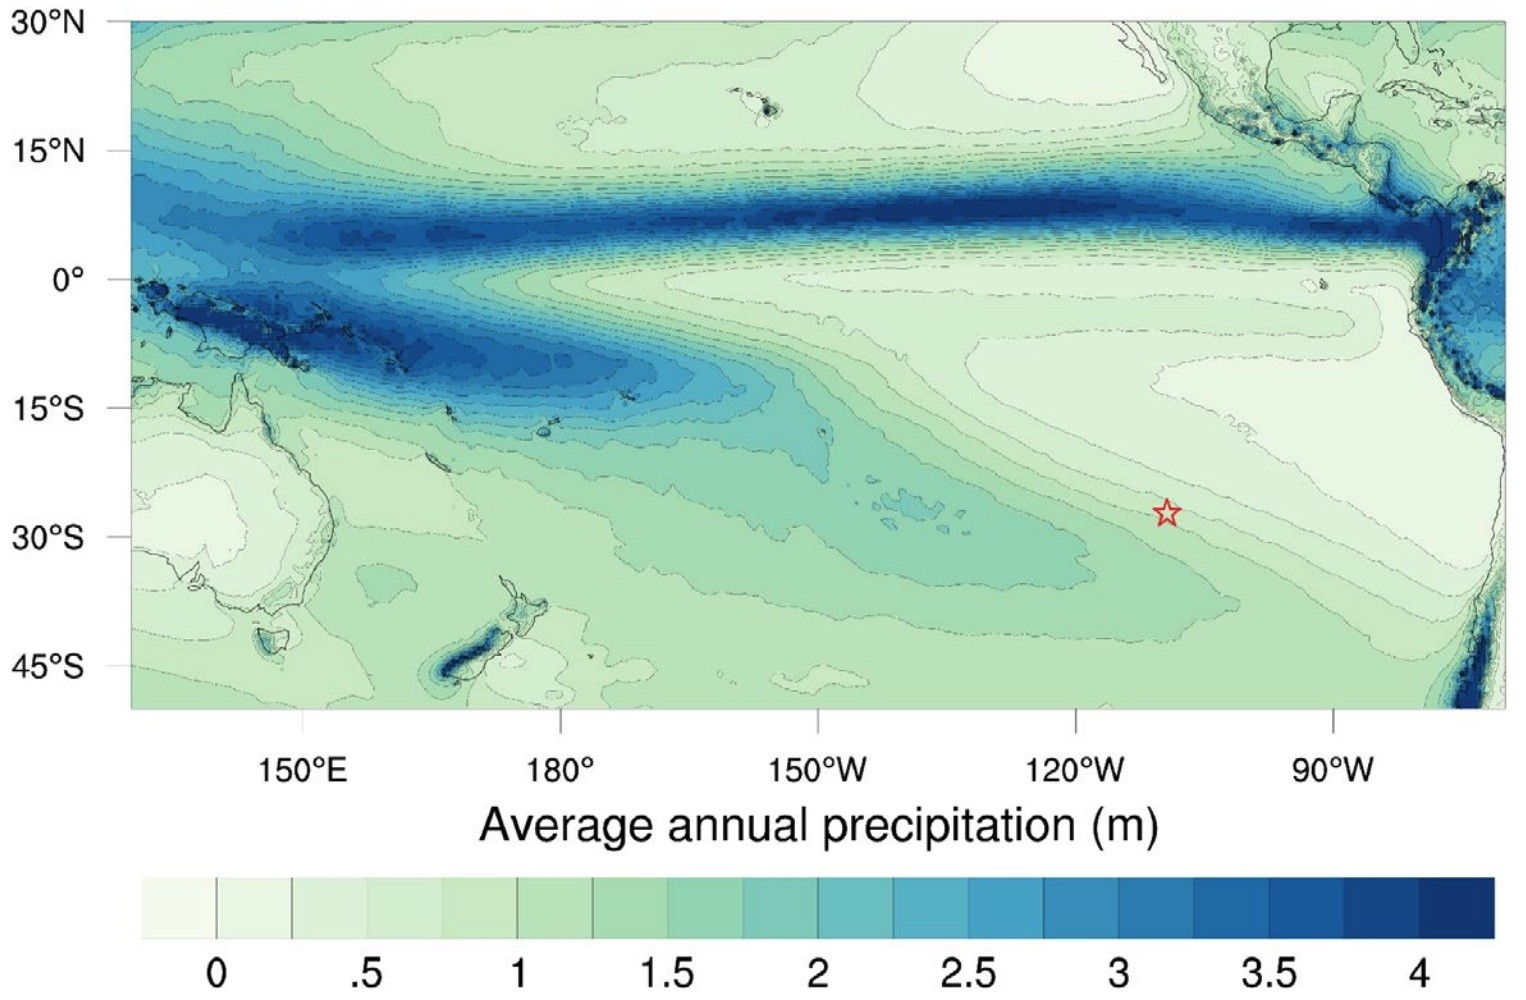 Average annual precipitation over the central and south Pacific Ocean from 1979 to 2017.